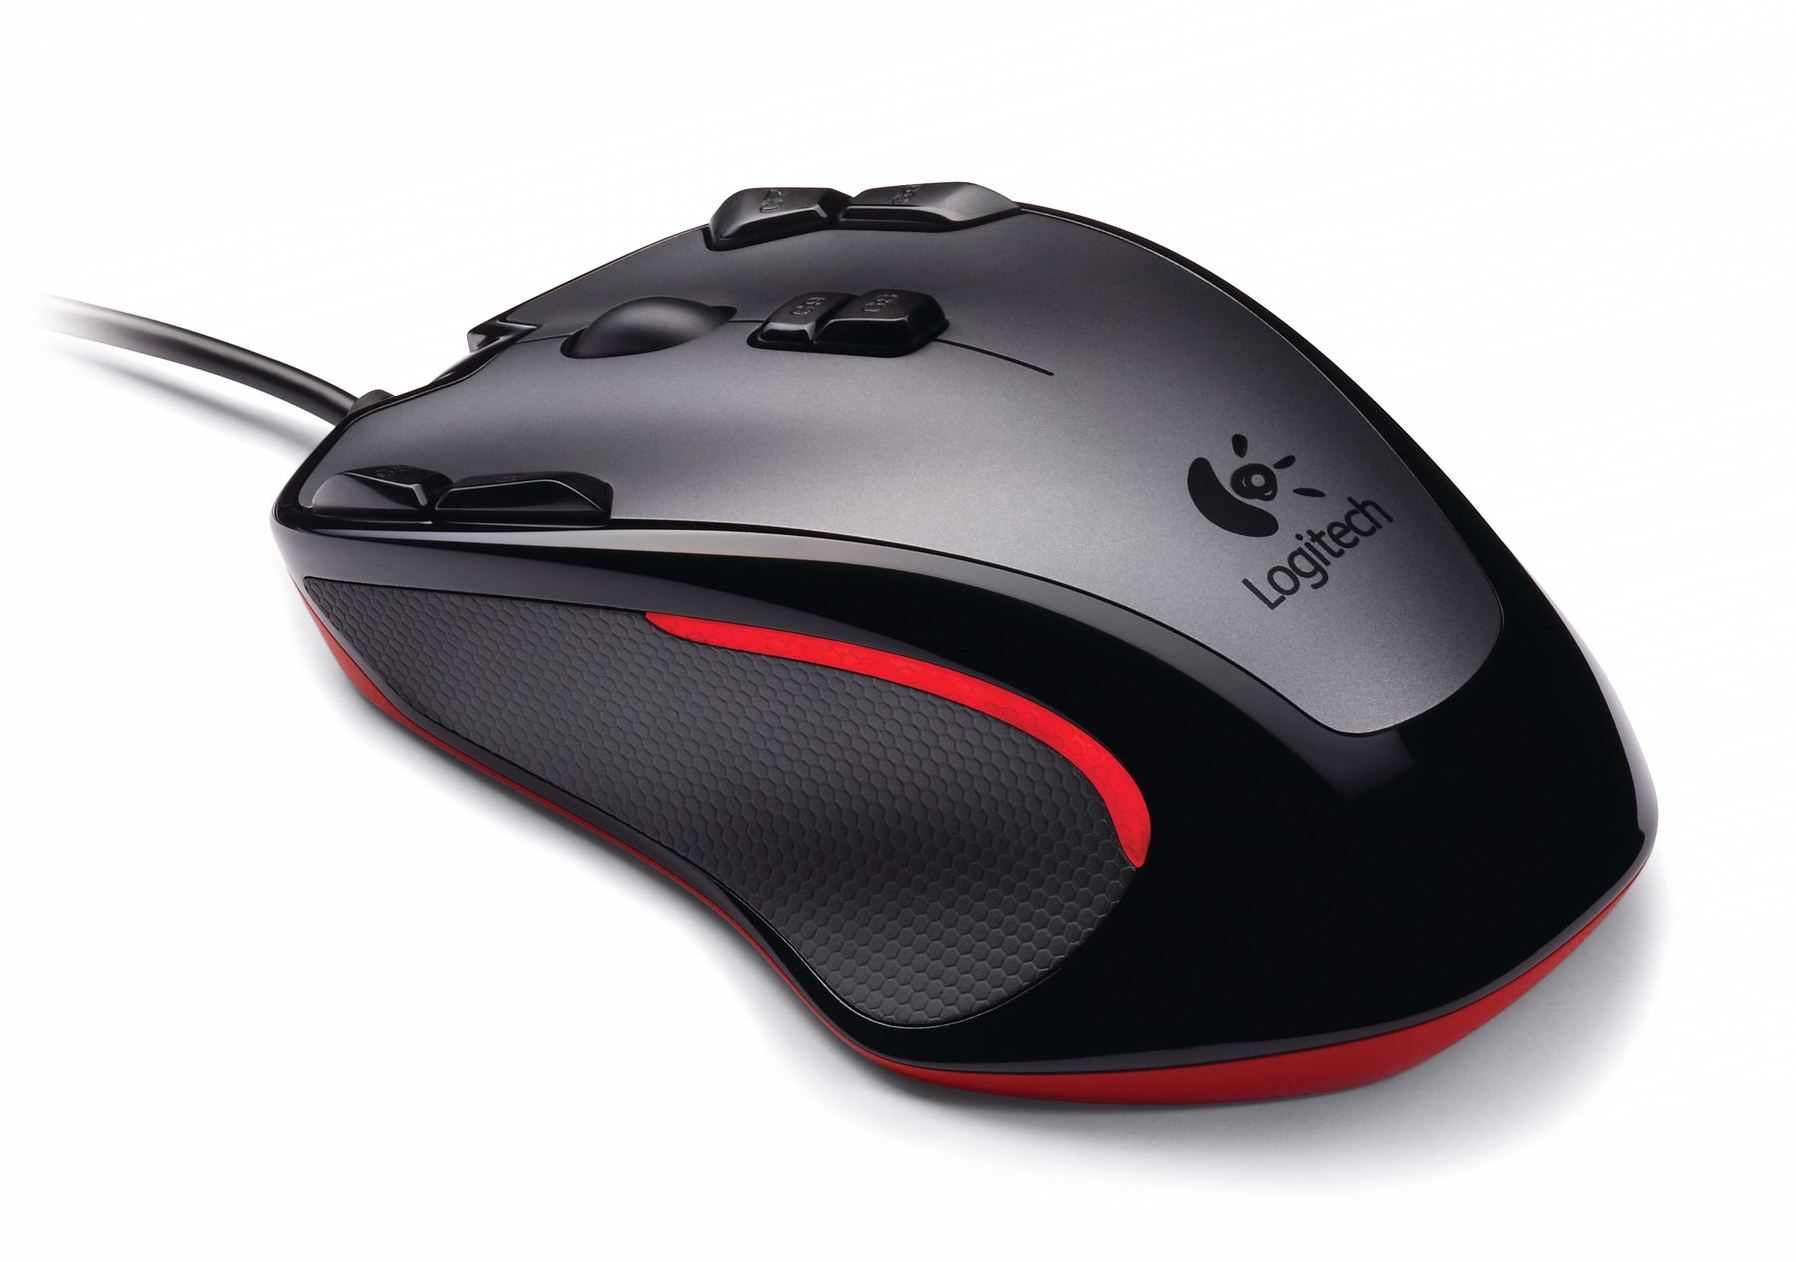 mouse for drag clicking